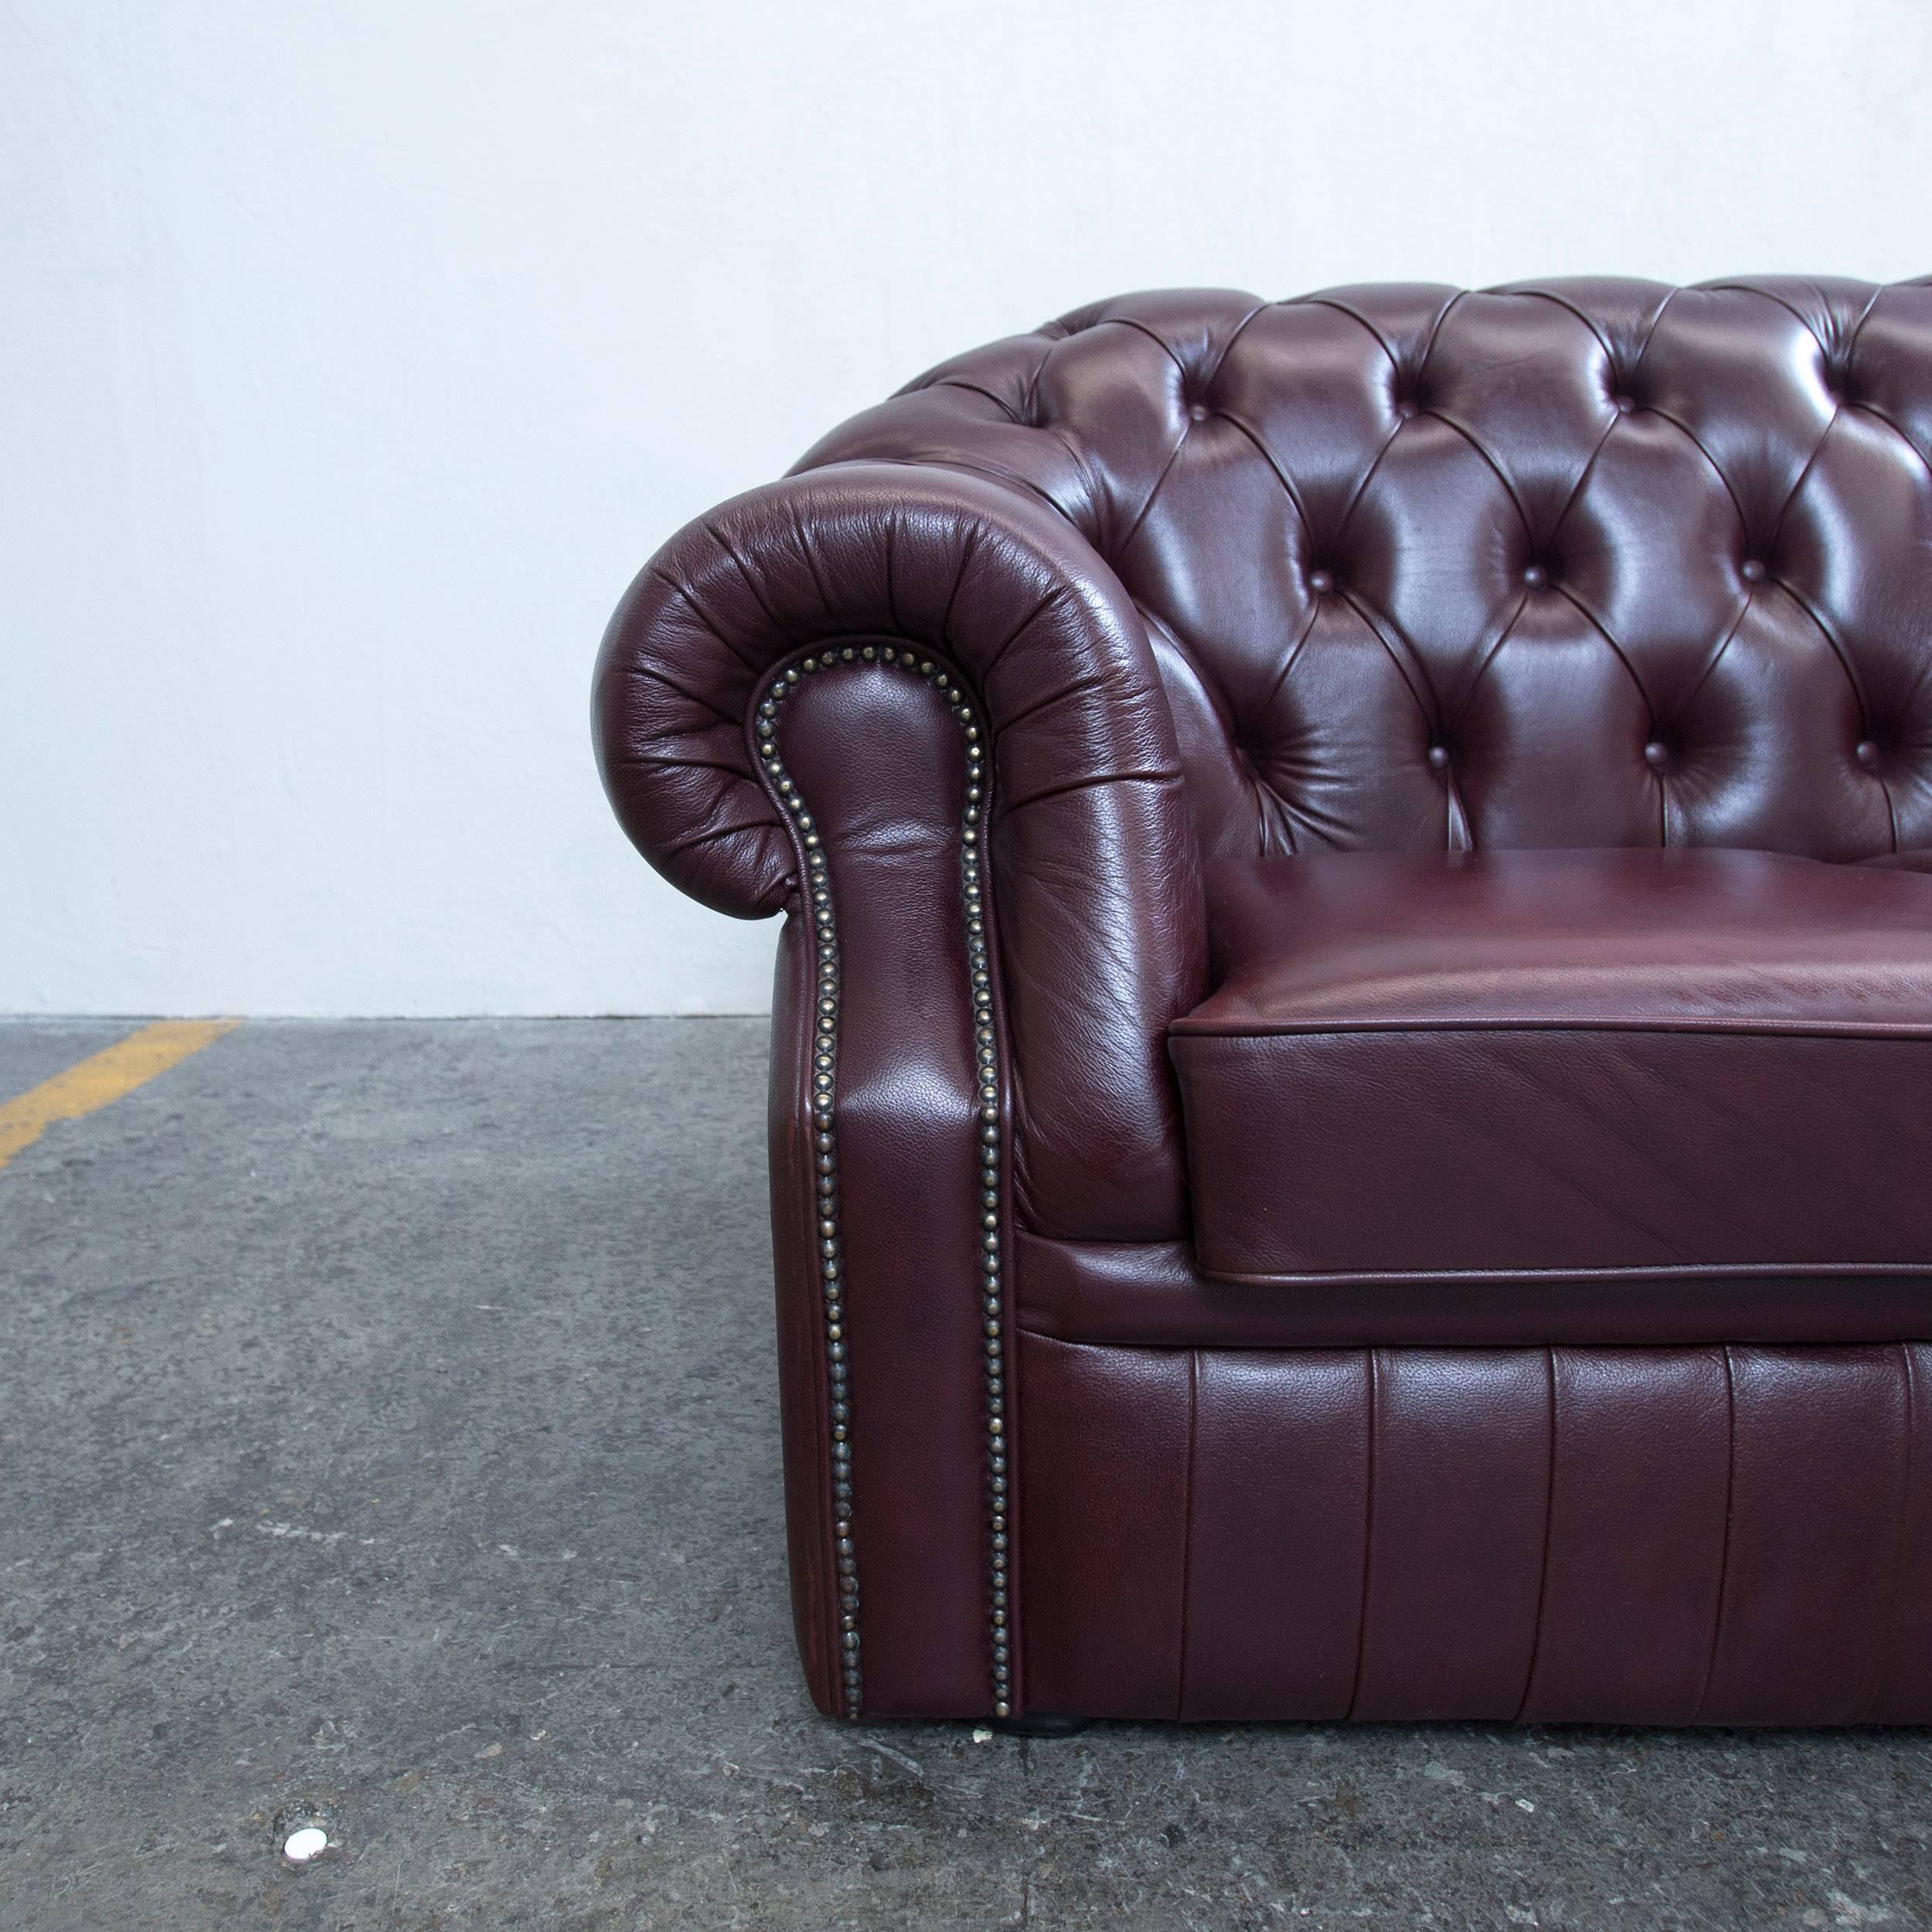 Brown red colored Chesterfield leather sofa in a vintage style, made for pure comfort and elegance.